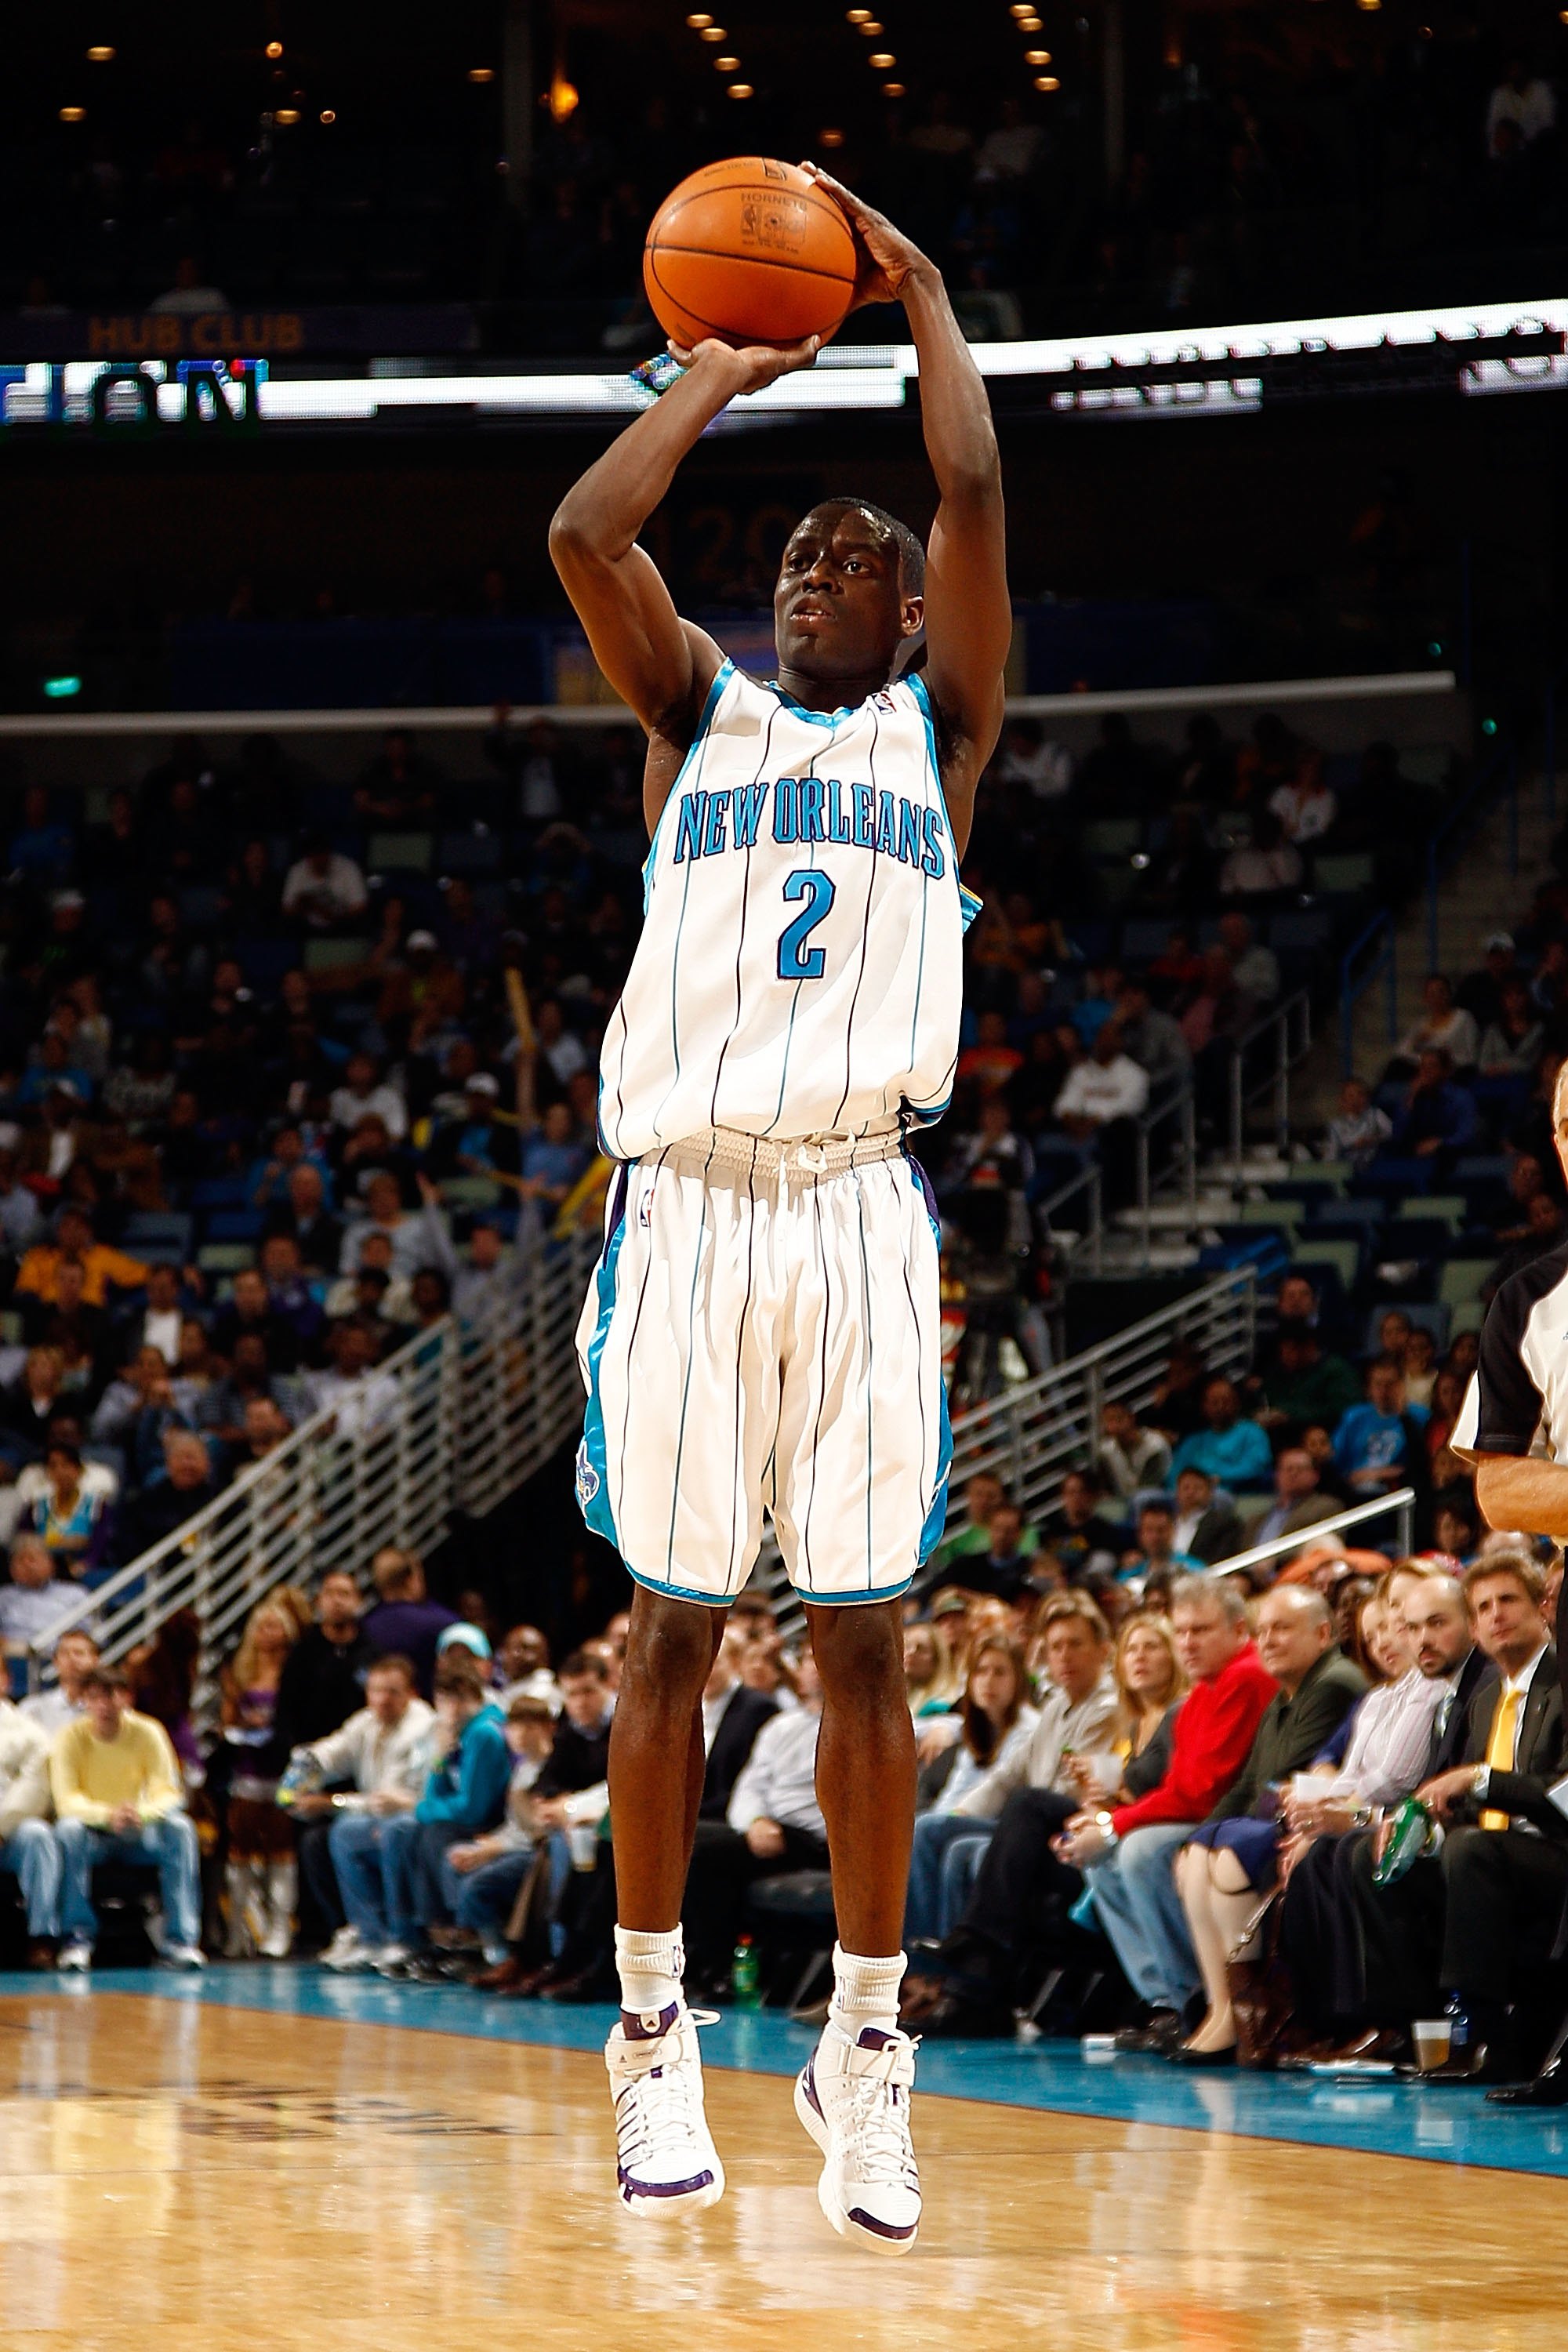 NEW ORLEANS - MARCH 22:  Darren Collison #2 of the New Orleans Hornets shoots the ball during the game against the Dallas Mavericks at the New Orleans Arena on March 22, 2010 in New Orleans, Louisiana.  NOTE TO USER: User expressly acknowledges and agrees